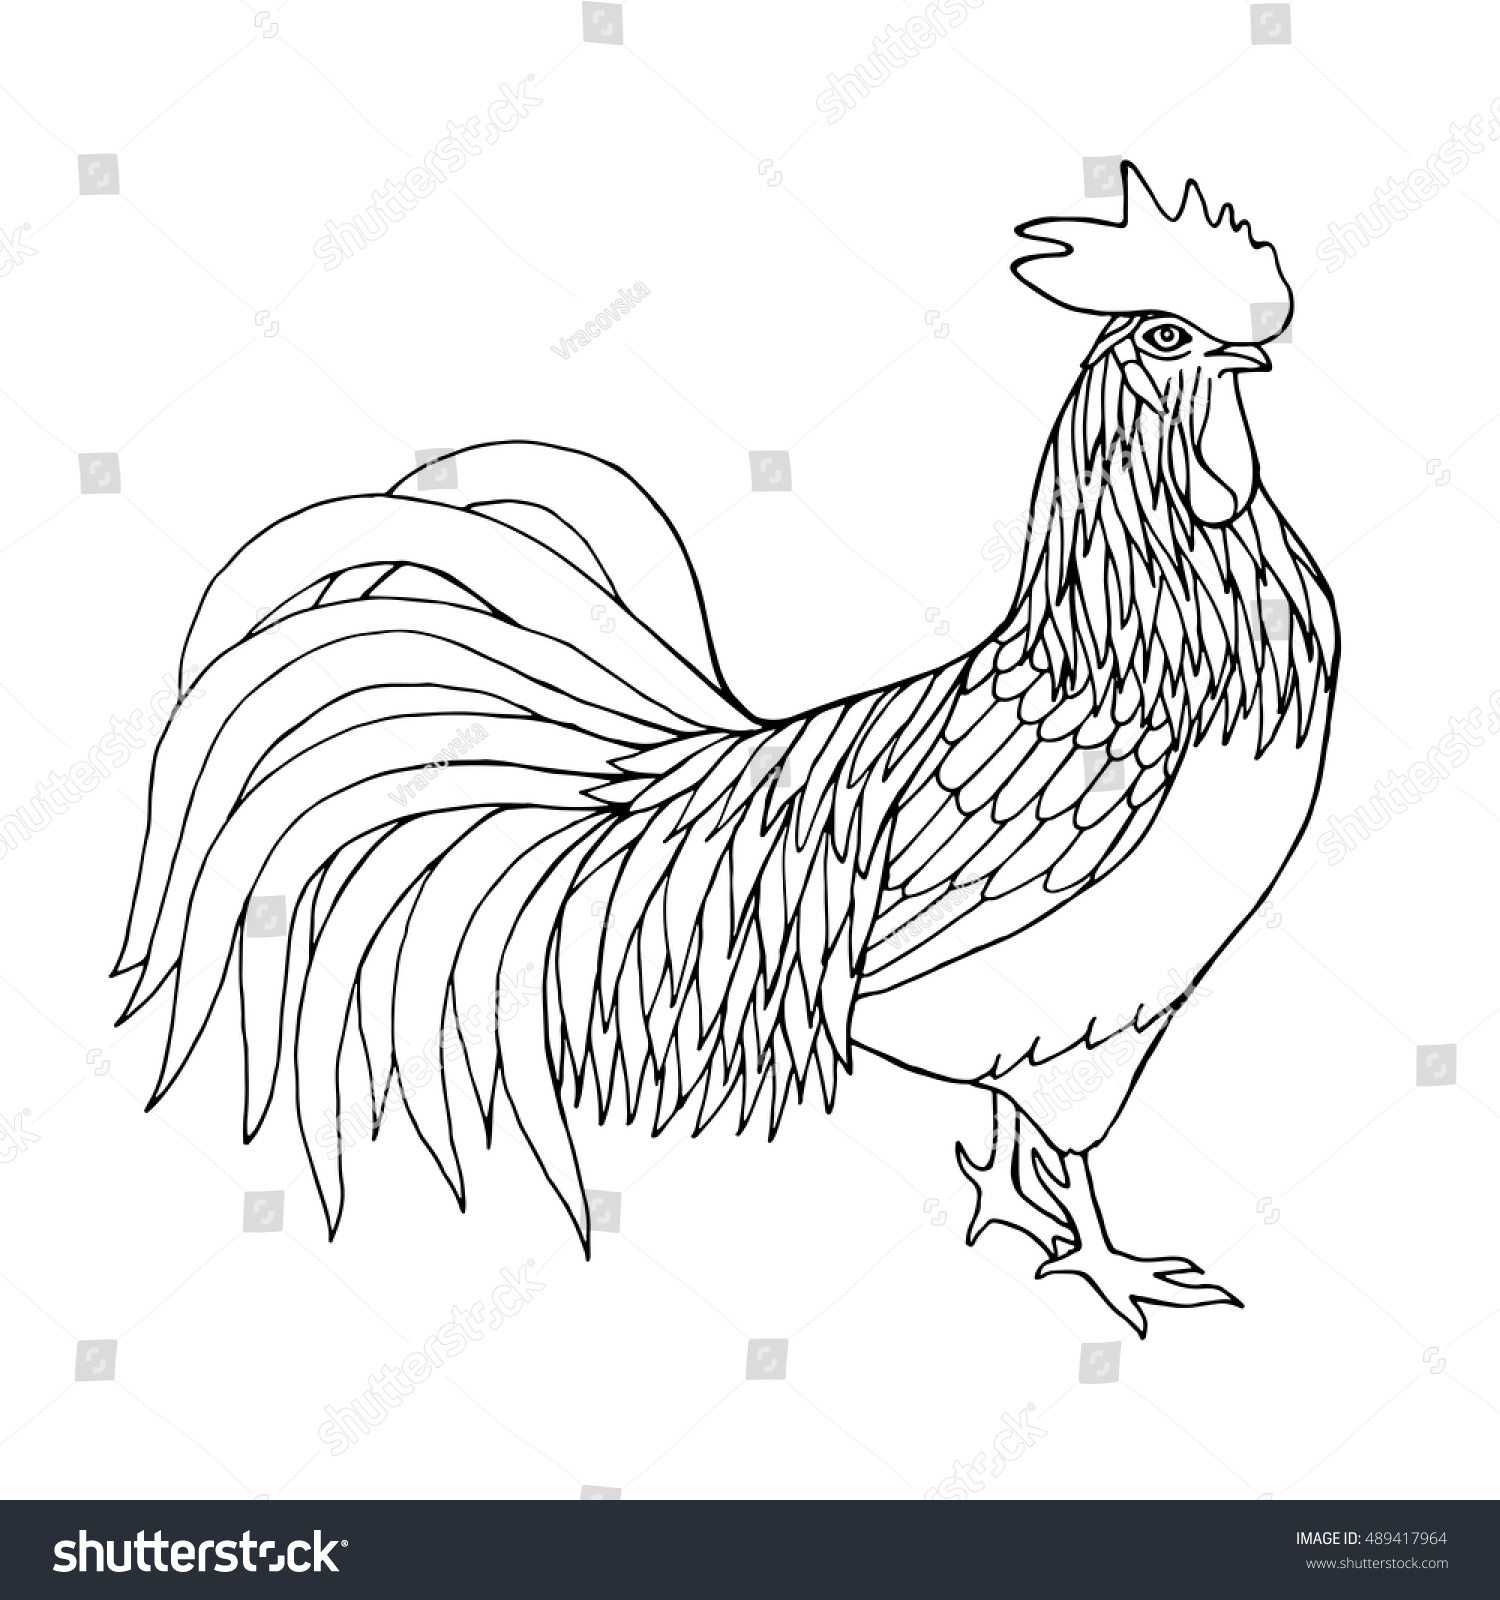 Rooster hand drawn illustration coloring page stock vector royalty free